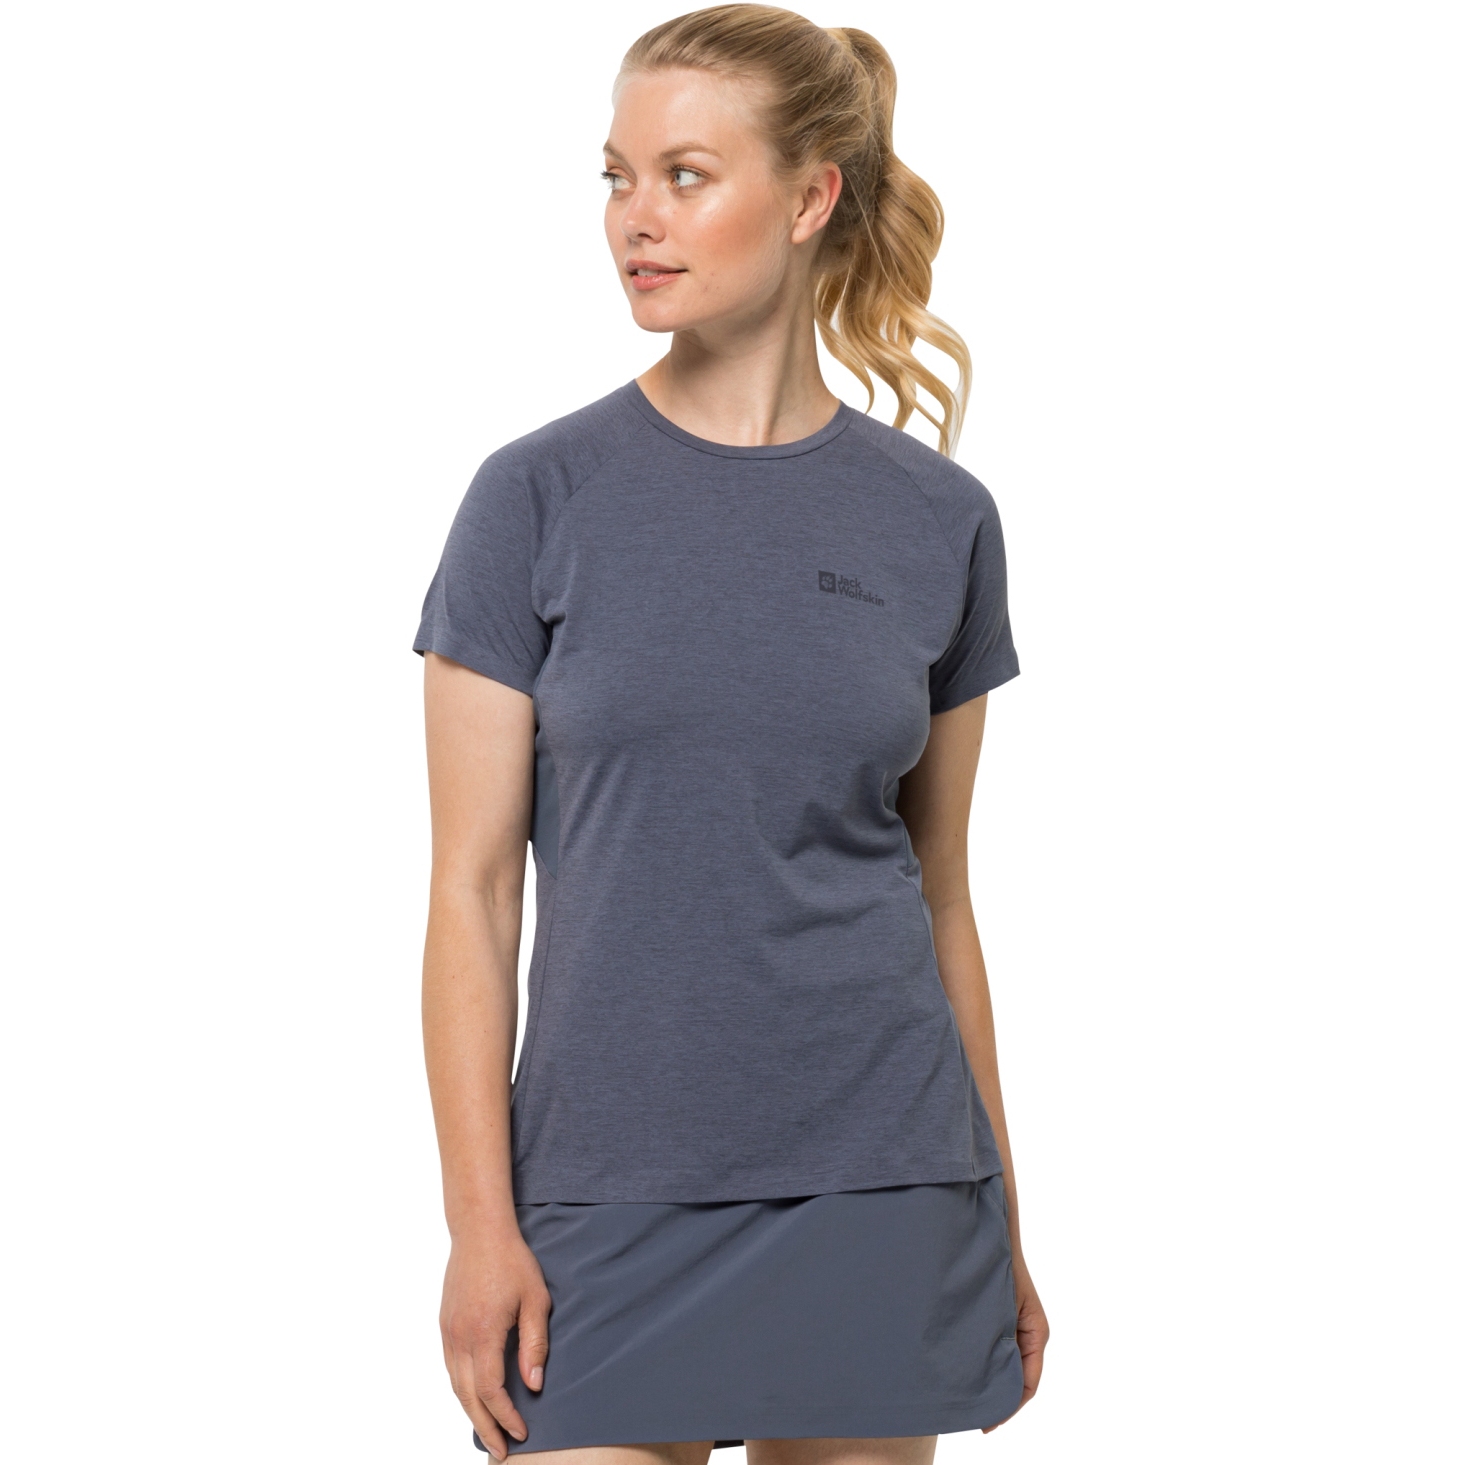 Picture of Jack Wolfskin Prelight Pro T-Shirt Women - dolphin